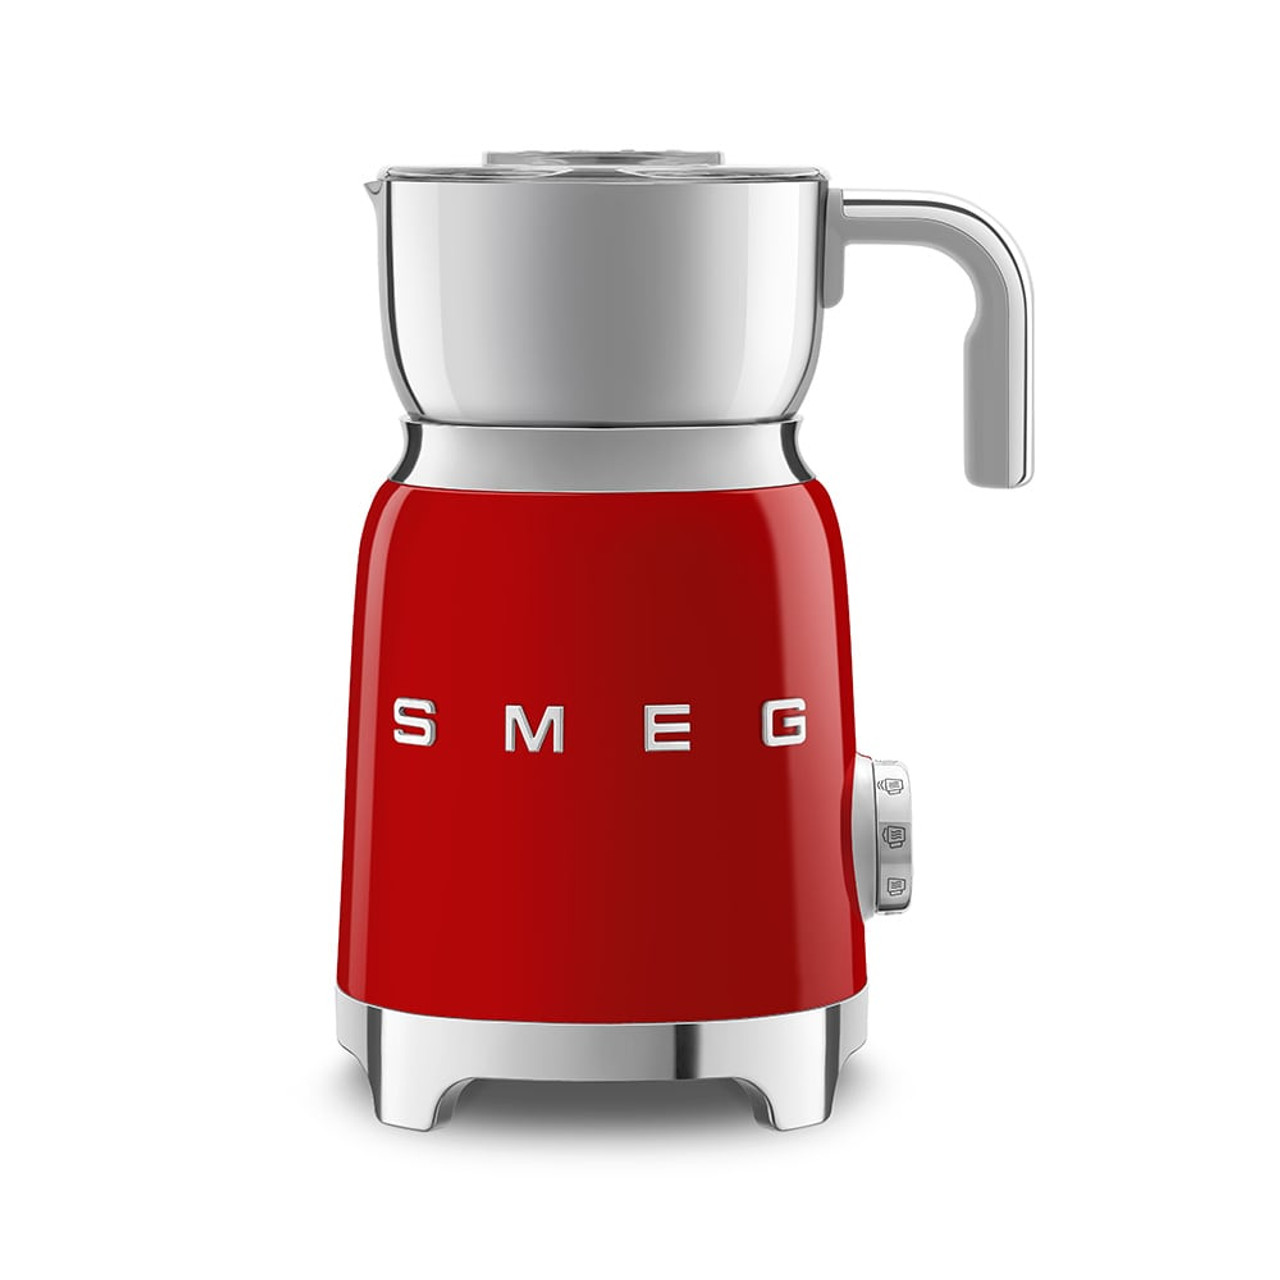 Smeg Red Automatic Coffee and Espresso Machine with Milk Frother +